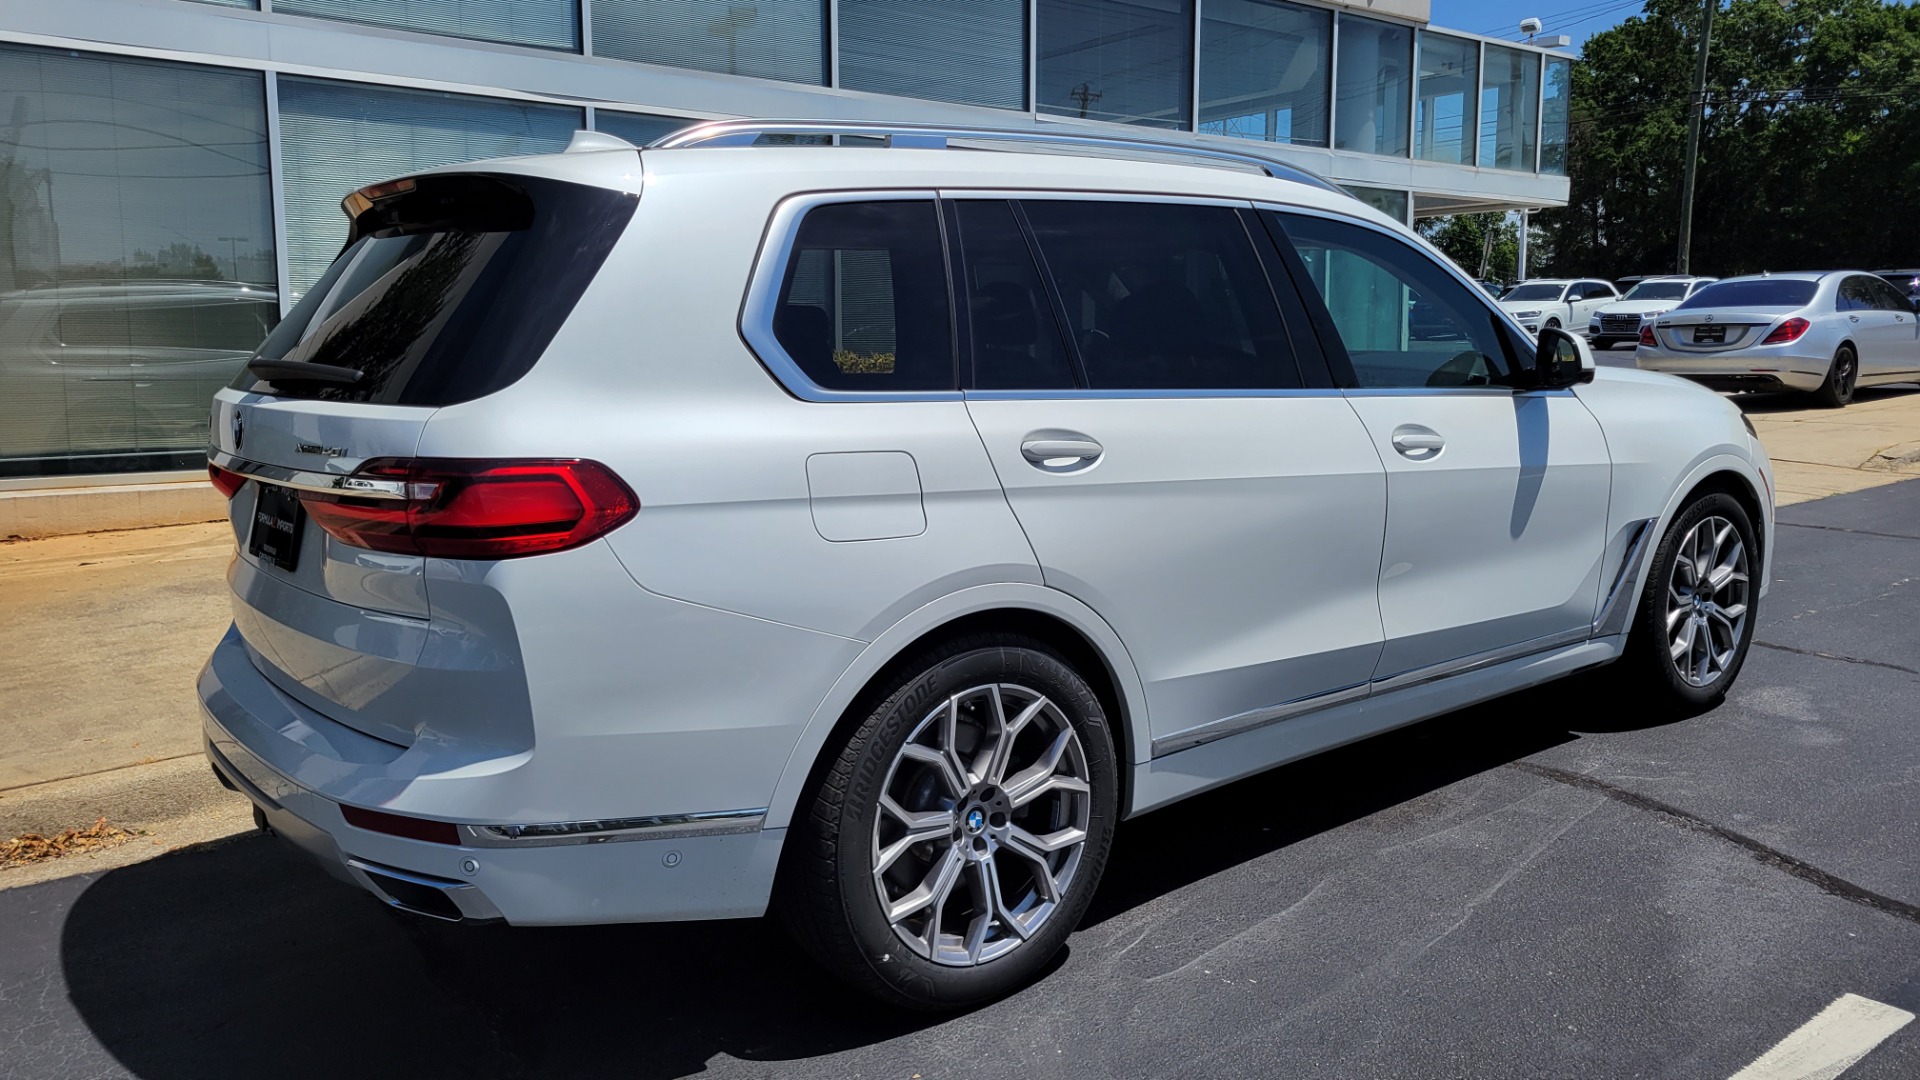 Used 2019 BMW X7 XDRIVE40I PREMIUM / NAV / HUD / PARK ASST PLUS / REMOTE START / 3D VIEW for sale $71,095 at Formula Imports in Charlotte NC 28227 7